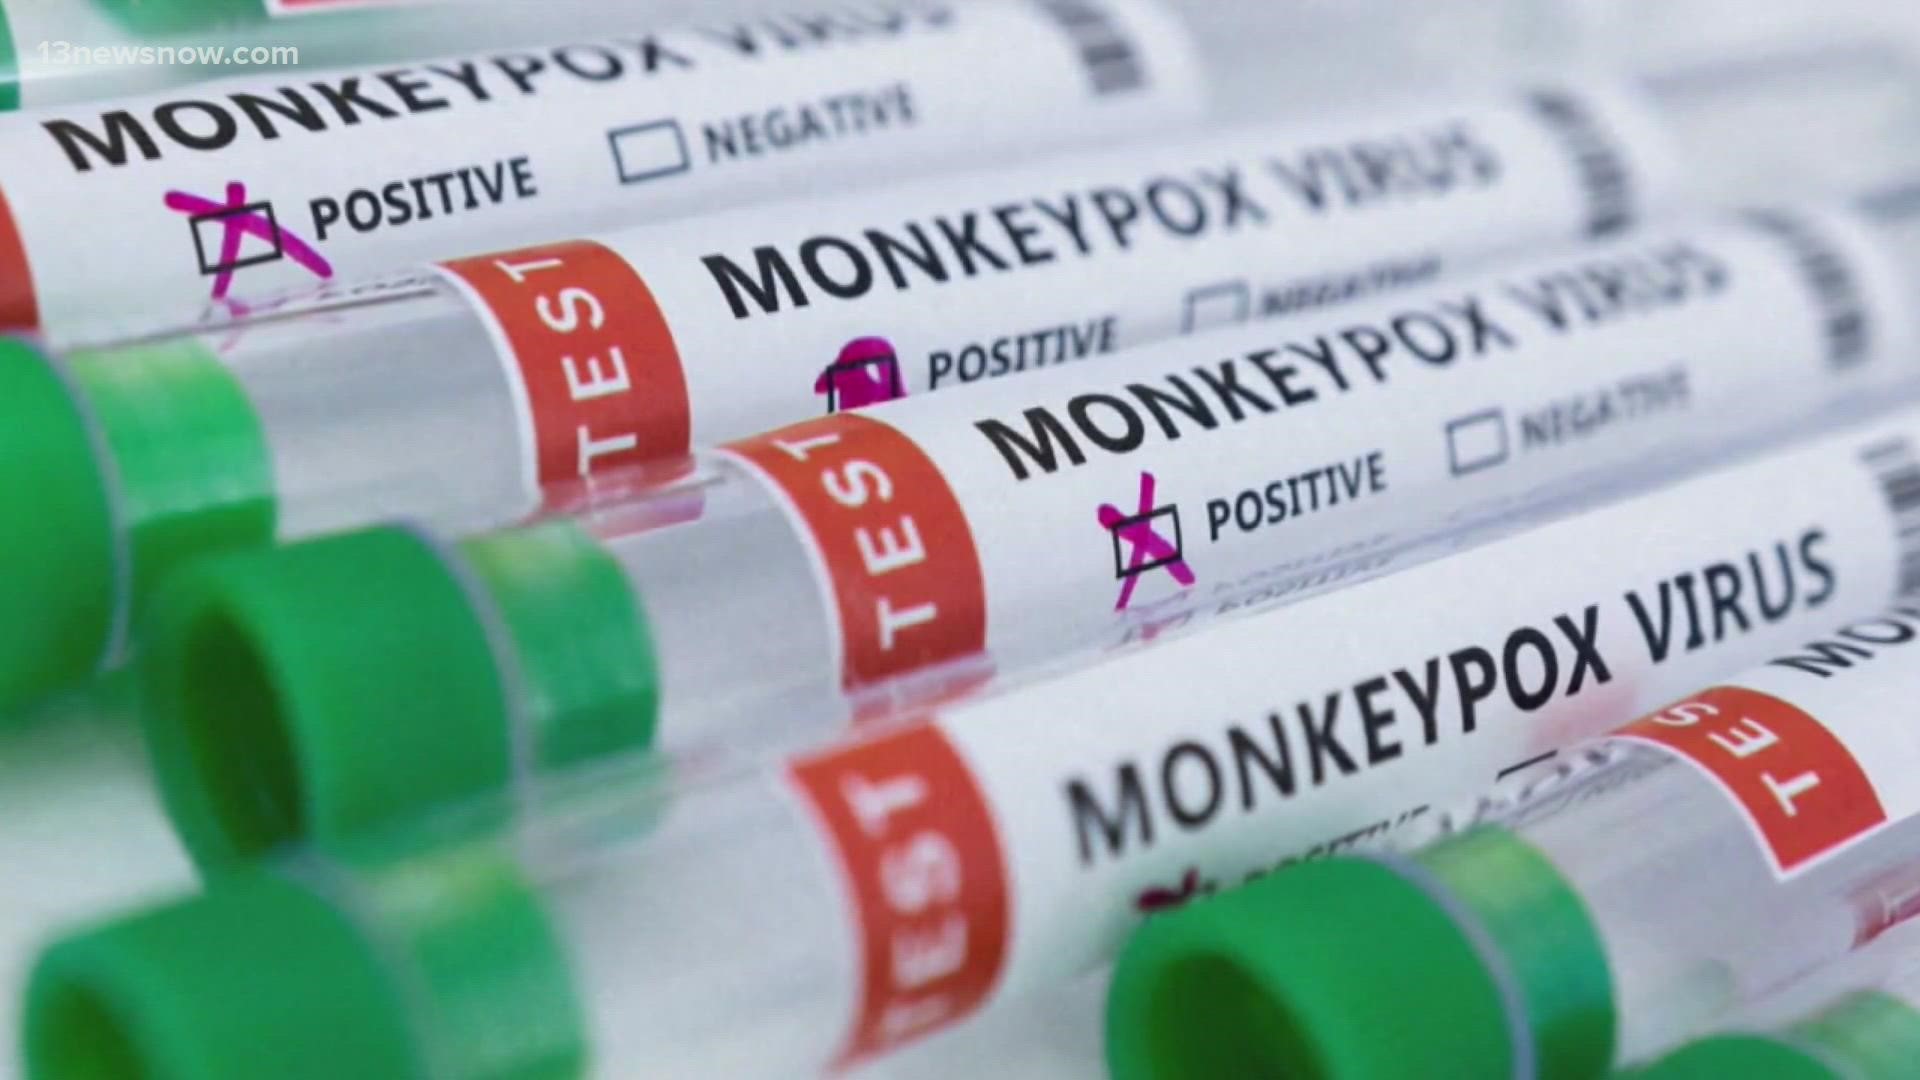 Virginia now has 122 cases of monkeypox. Nationwide, more than 7,500 people have tested positive.